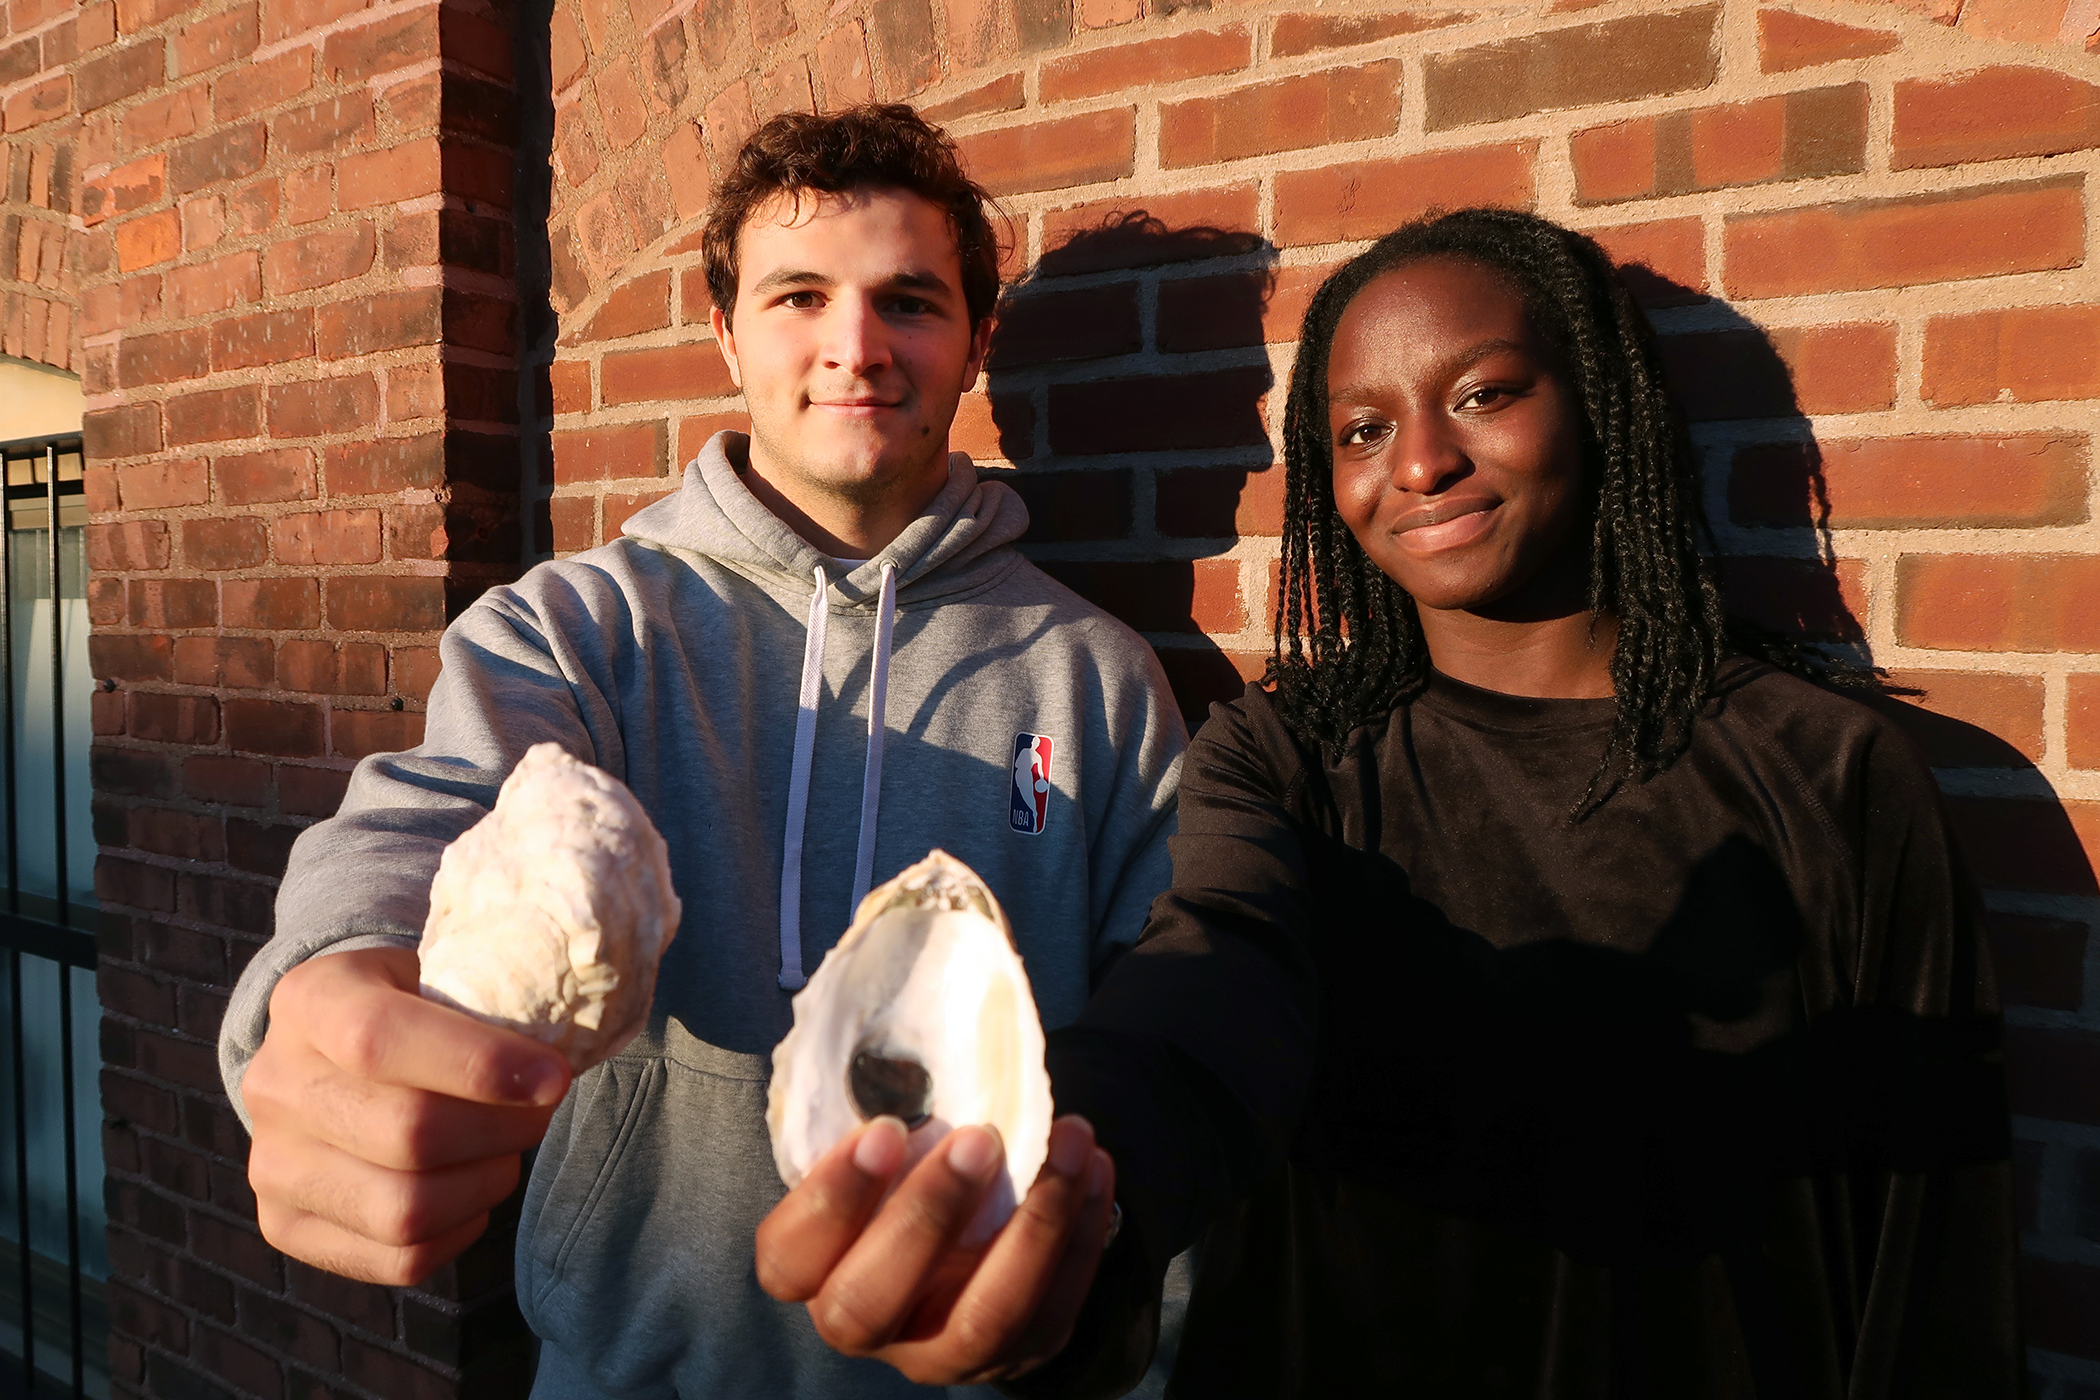 MIT Sea Grant students Santiago Borrego and Unyime Usua hold oyster shells.